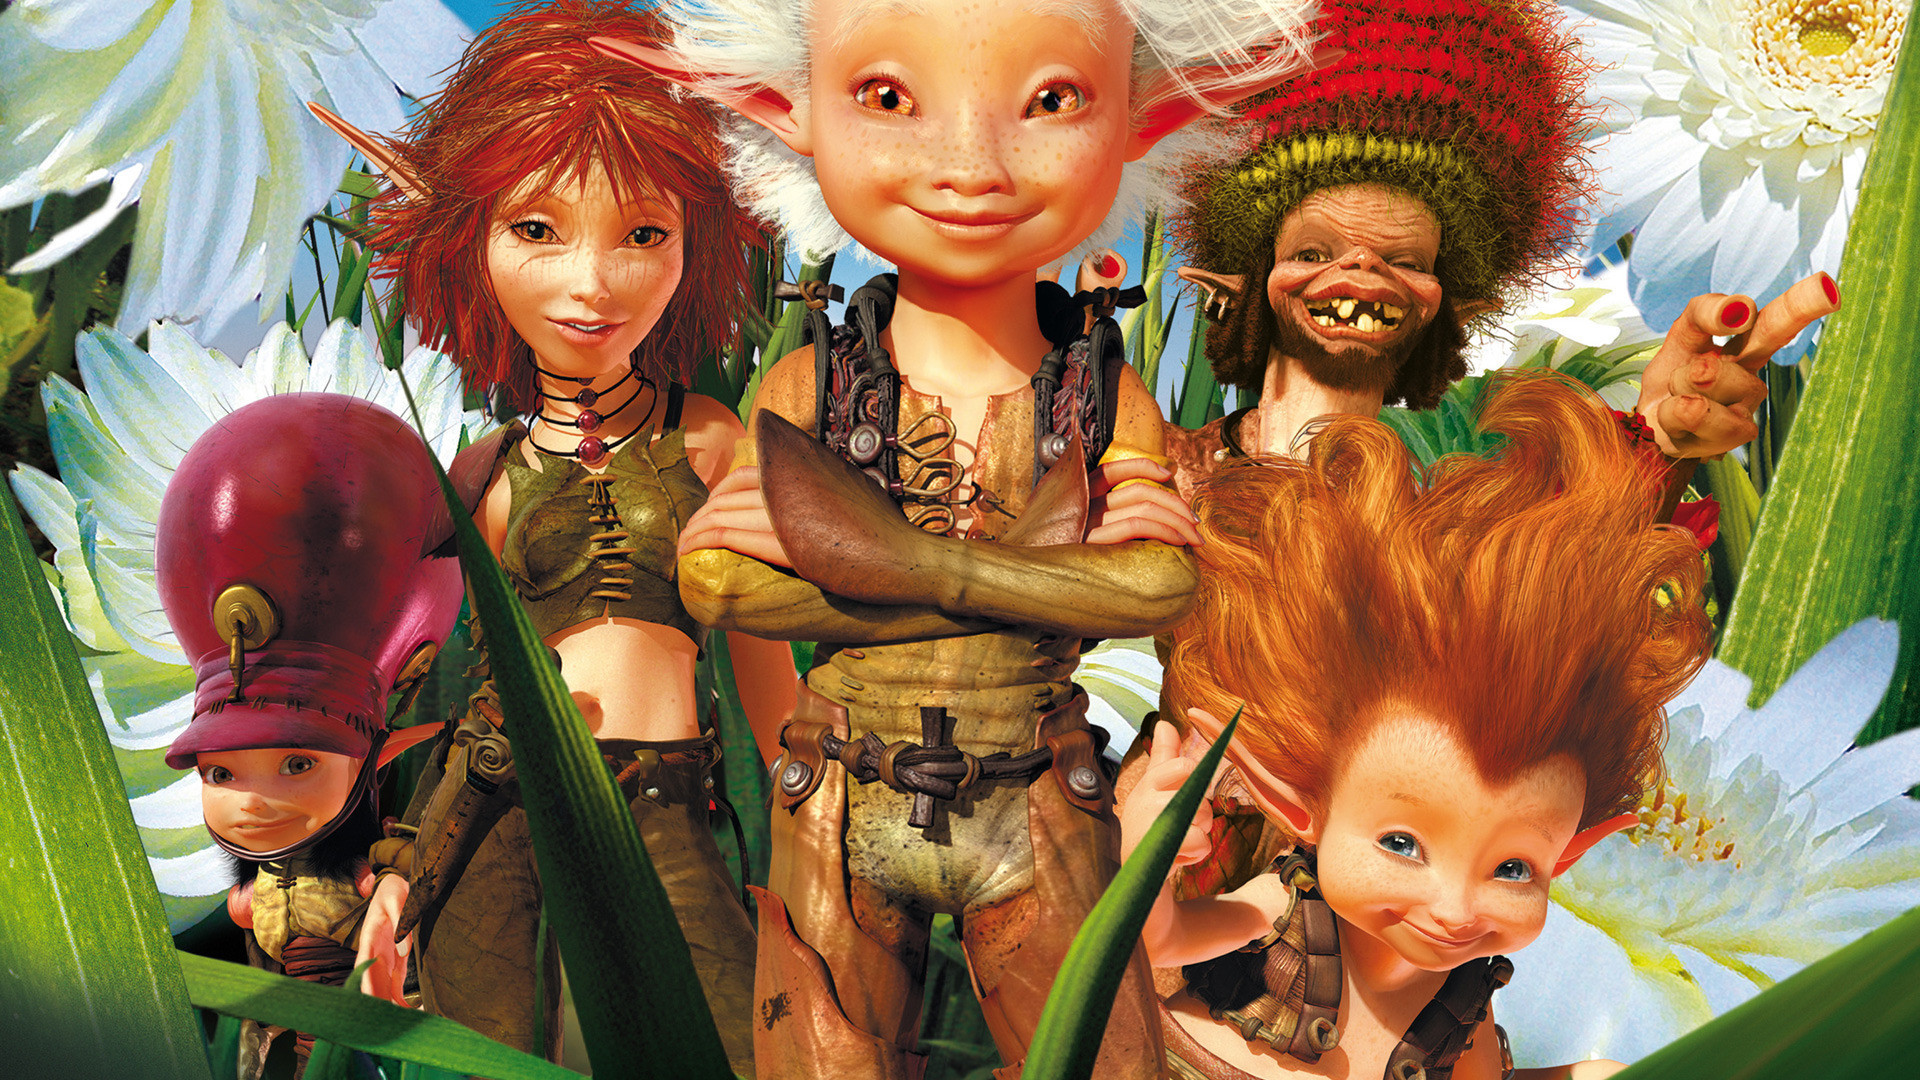 Movie Arthur and the Invisibles HD Wallpaper | Background Image